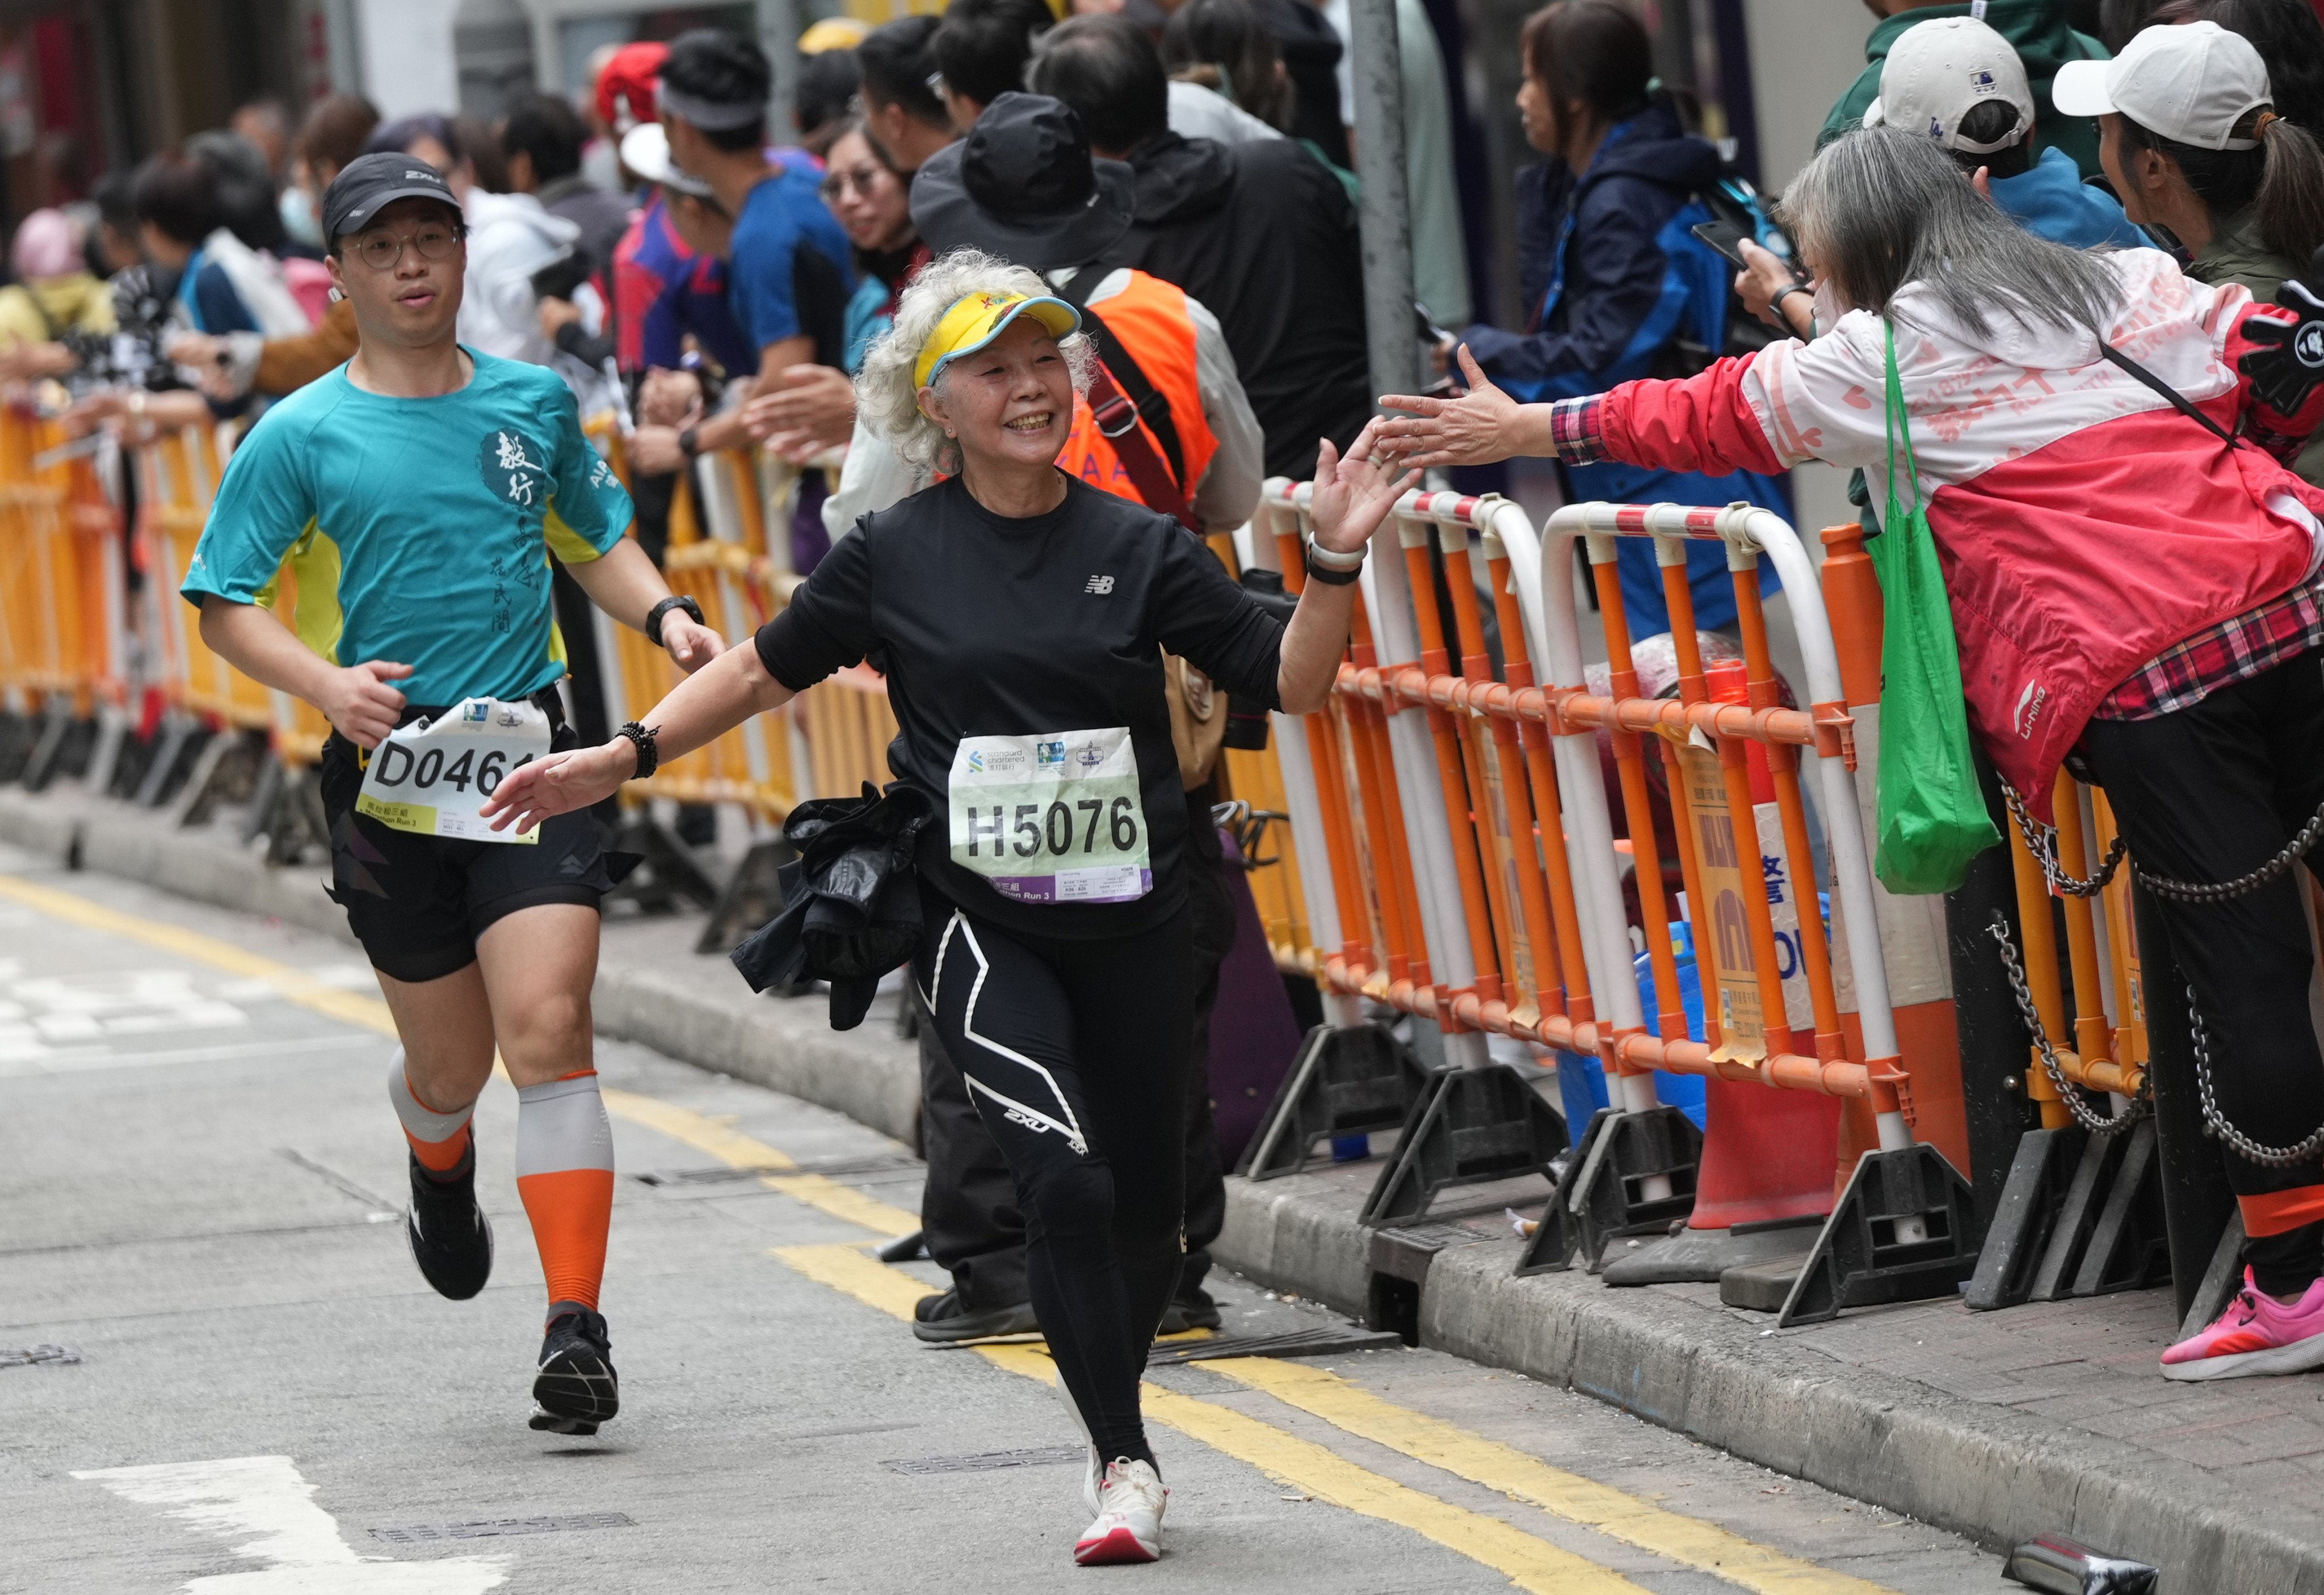 Runners enjoy the crowds in Causeway Bay during the Hong Kong Marathon event on January 21. Photo: Eugene Lee